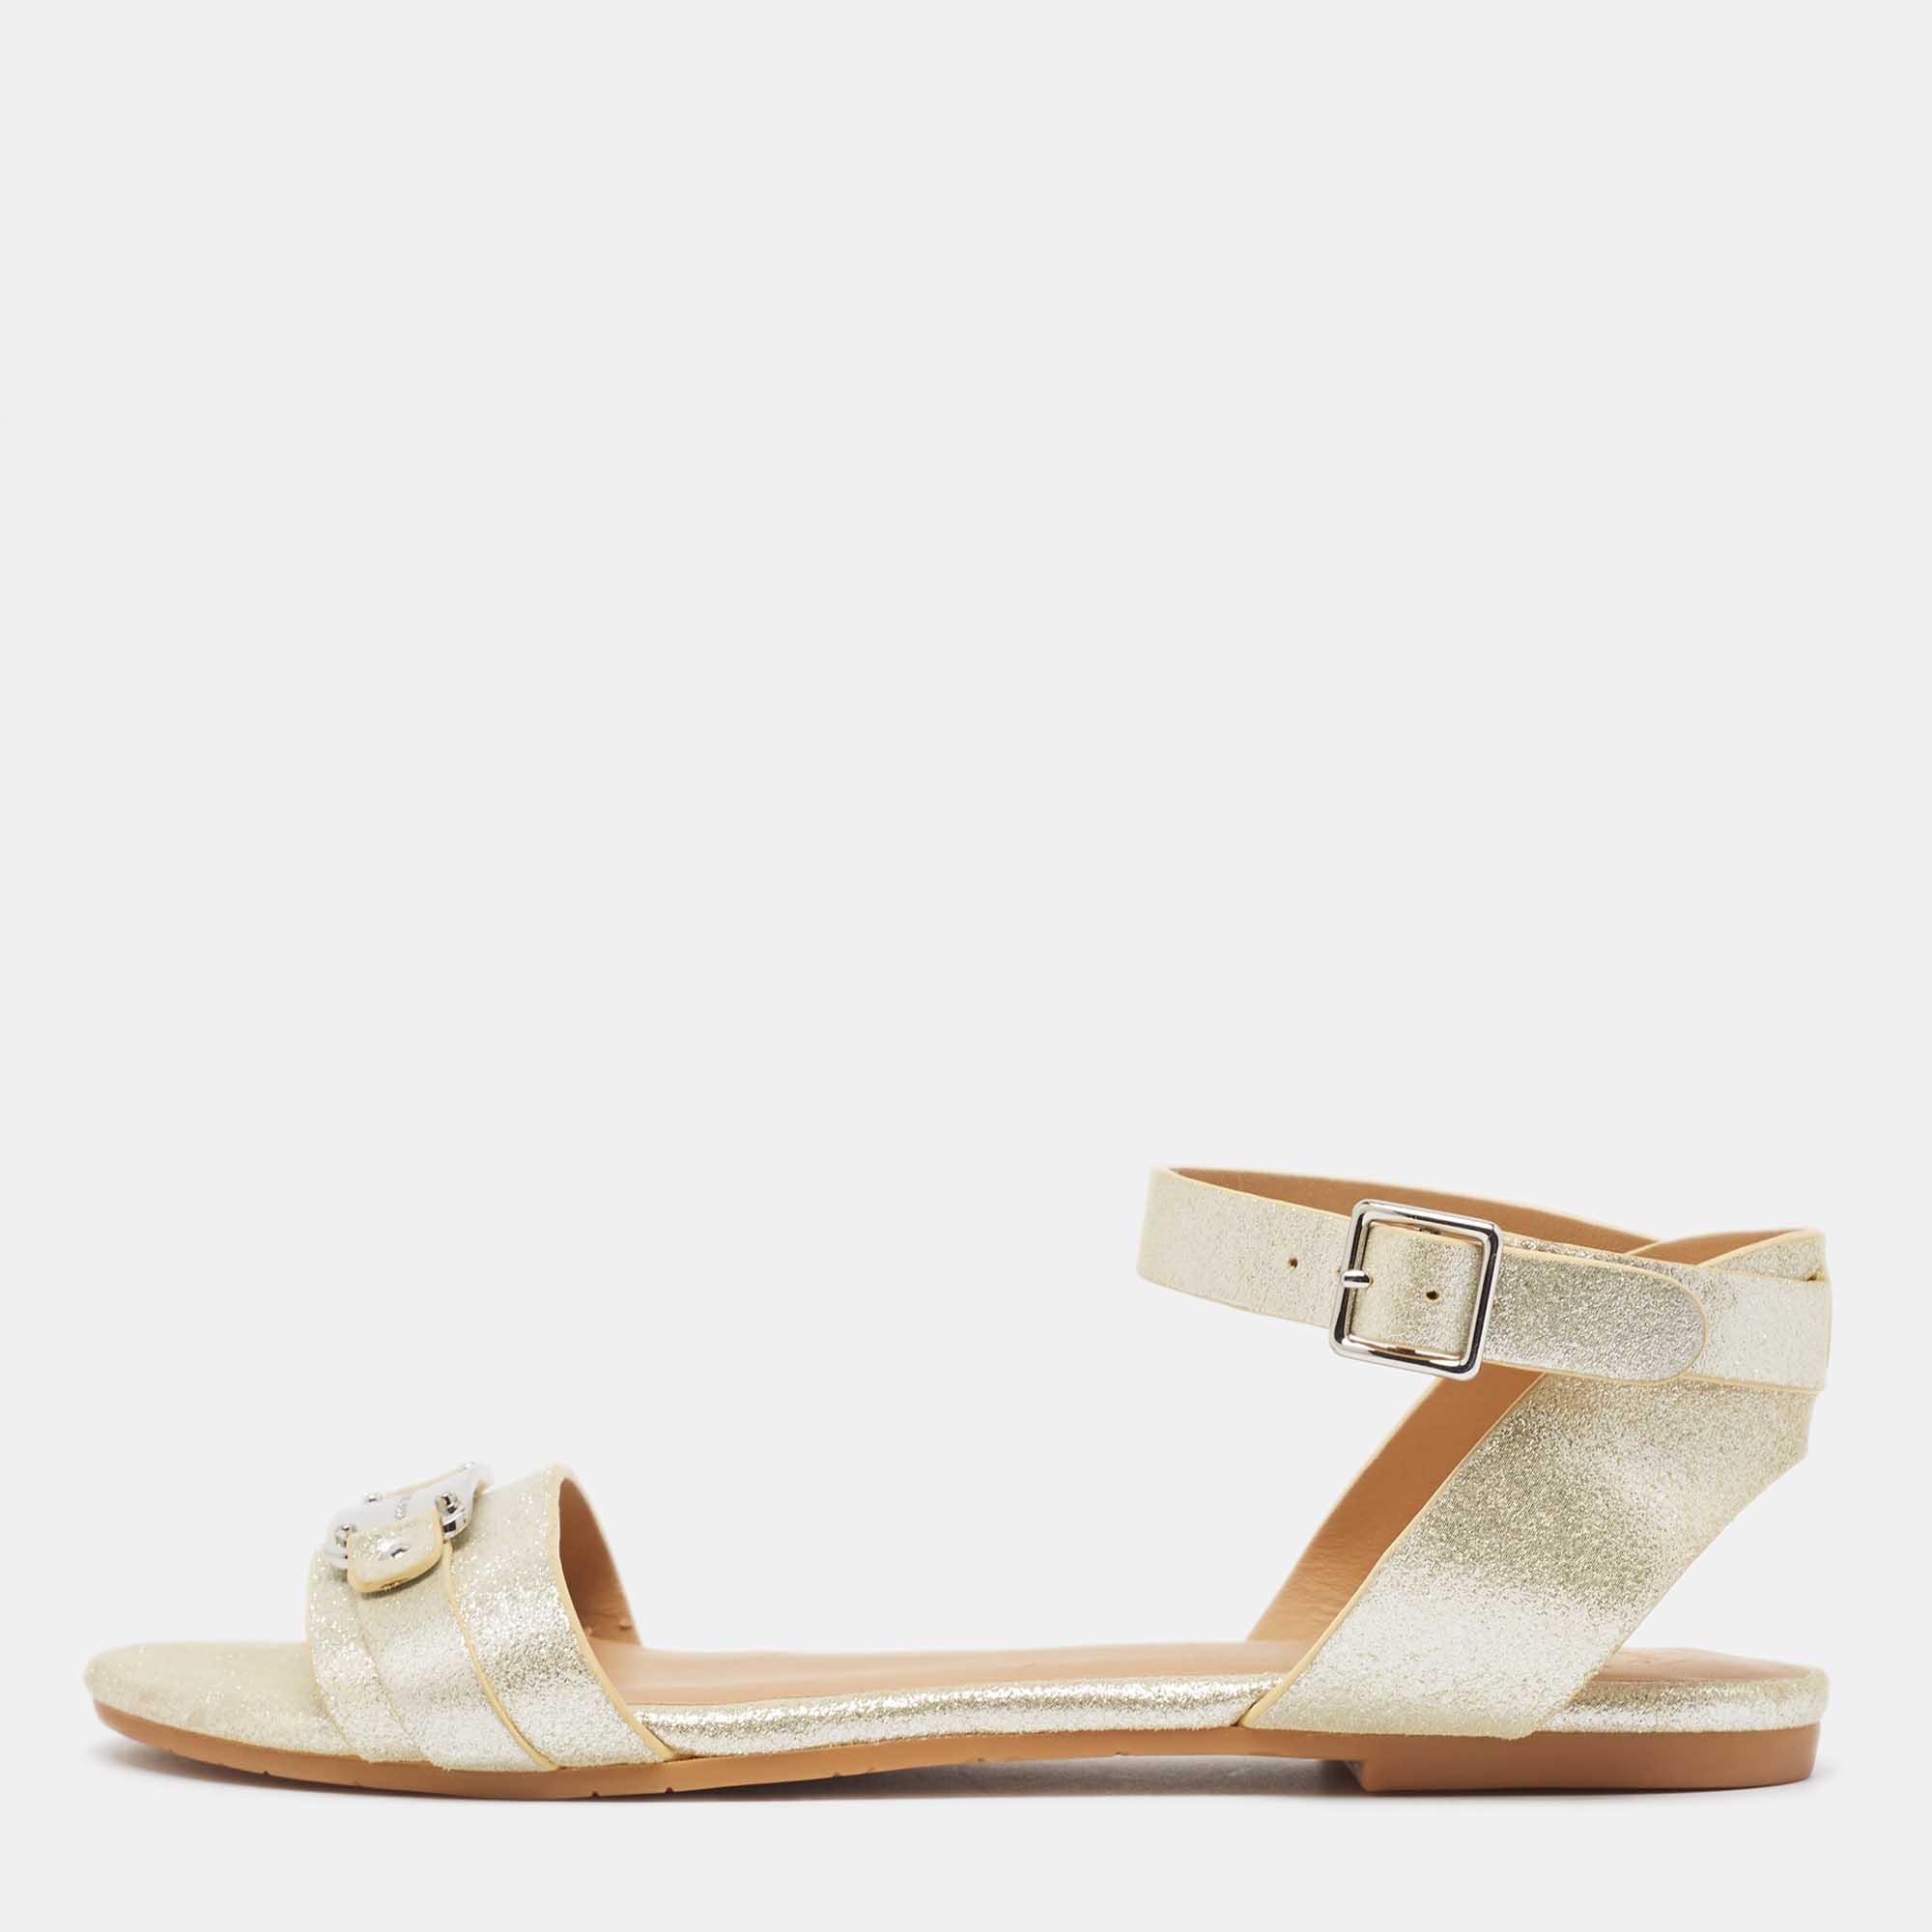 Marc by marc jacobs silver glitter ankle strap flat sandals size 36